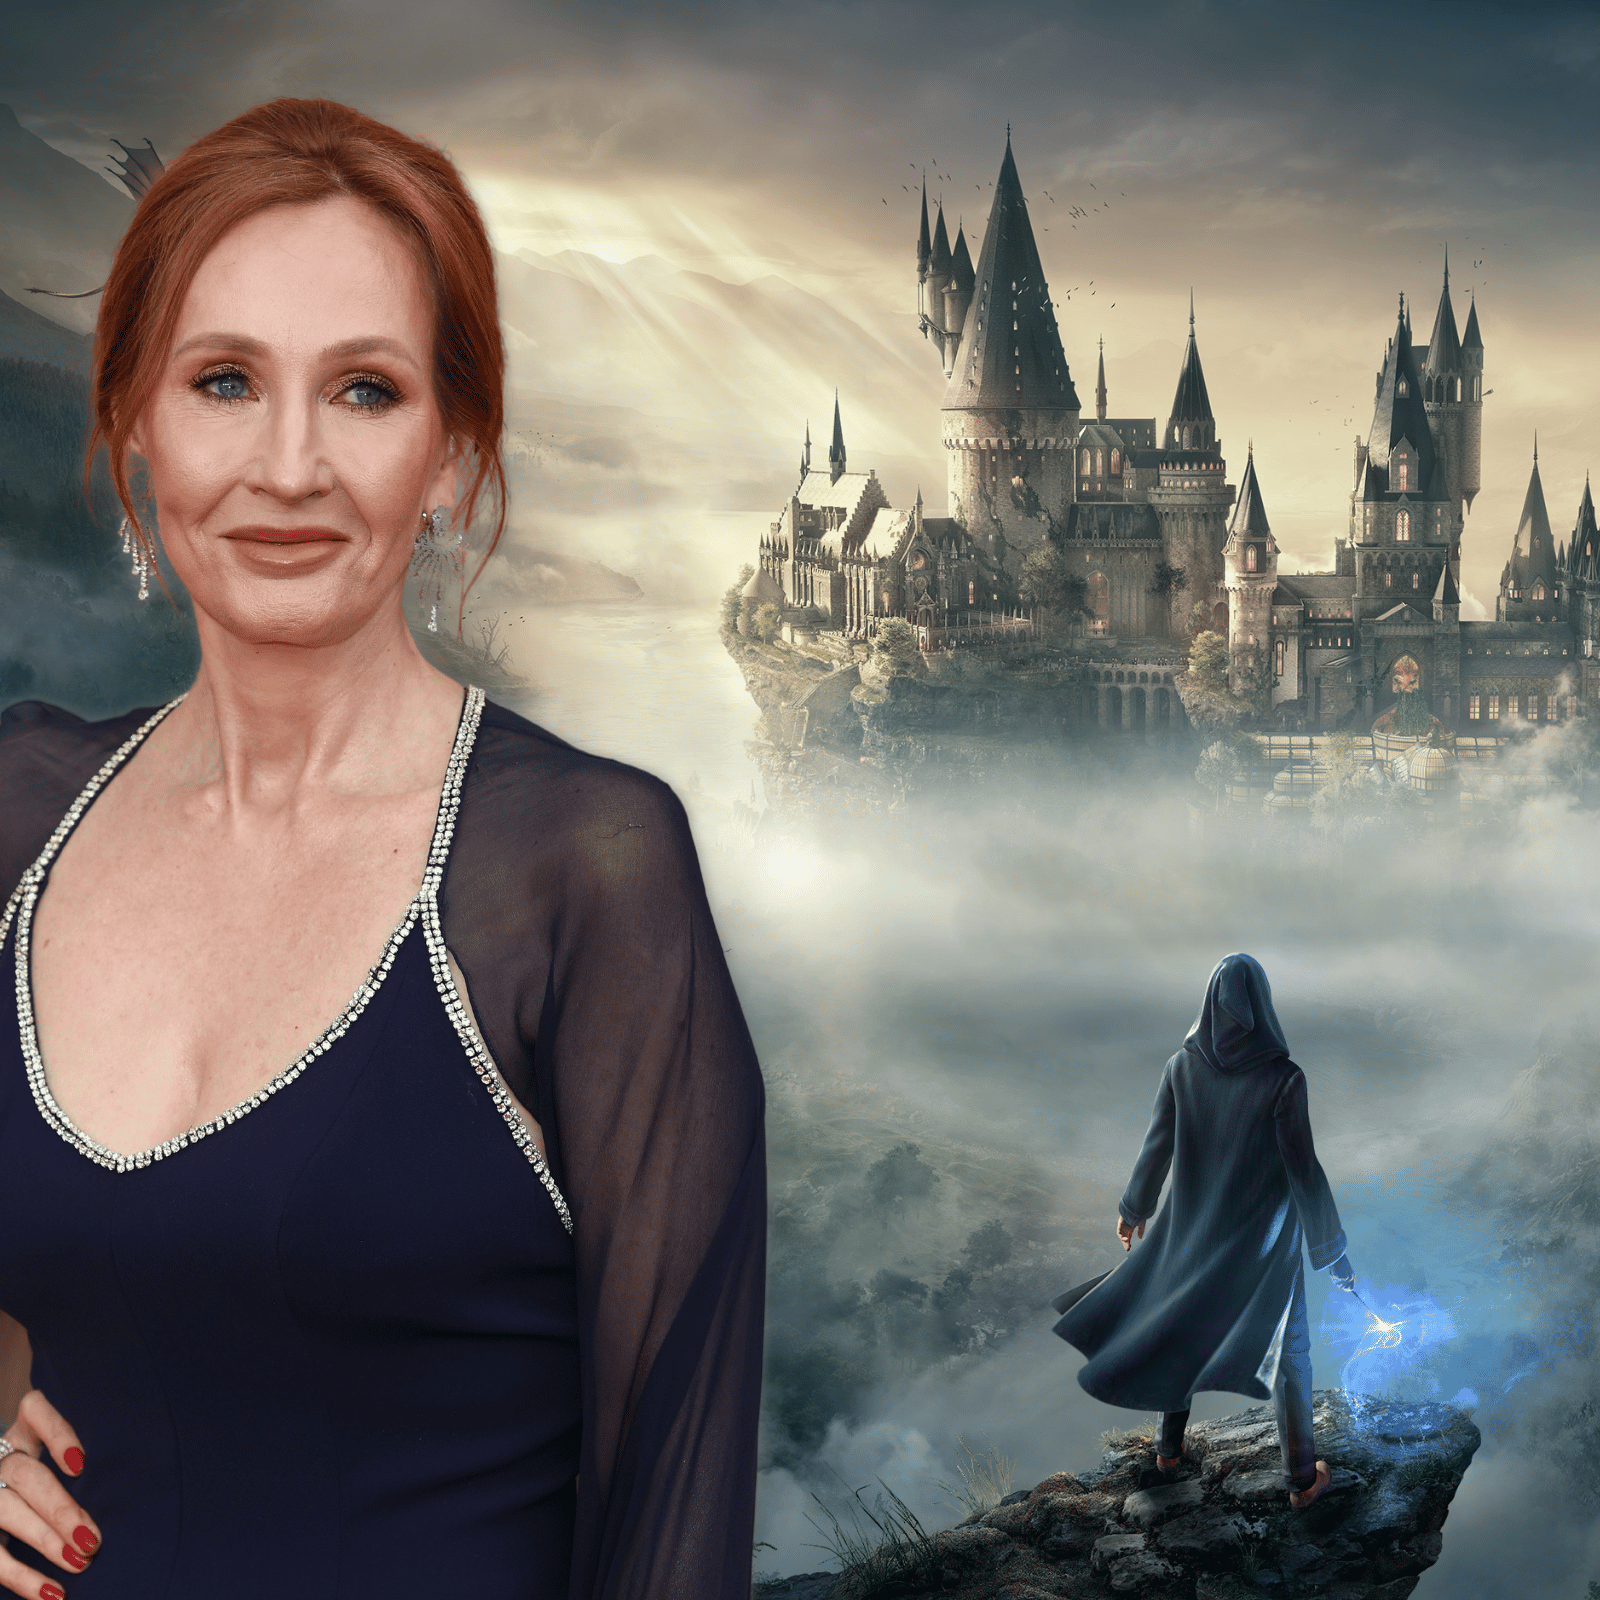 Hogwarts Legacy Has No Direct Involvement From Original Harry Potter Author